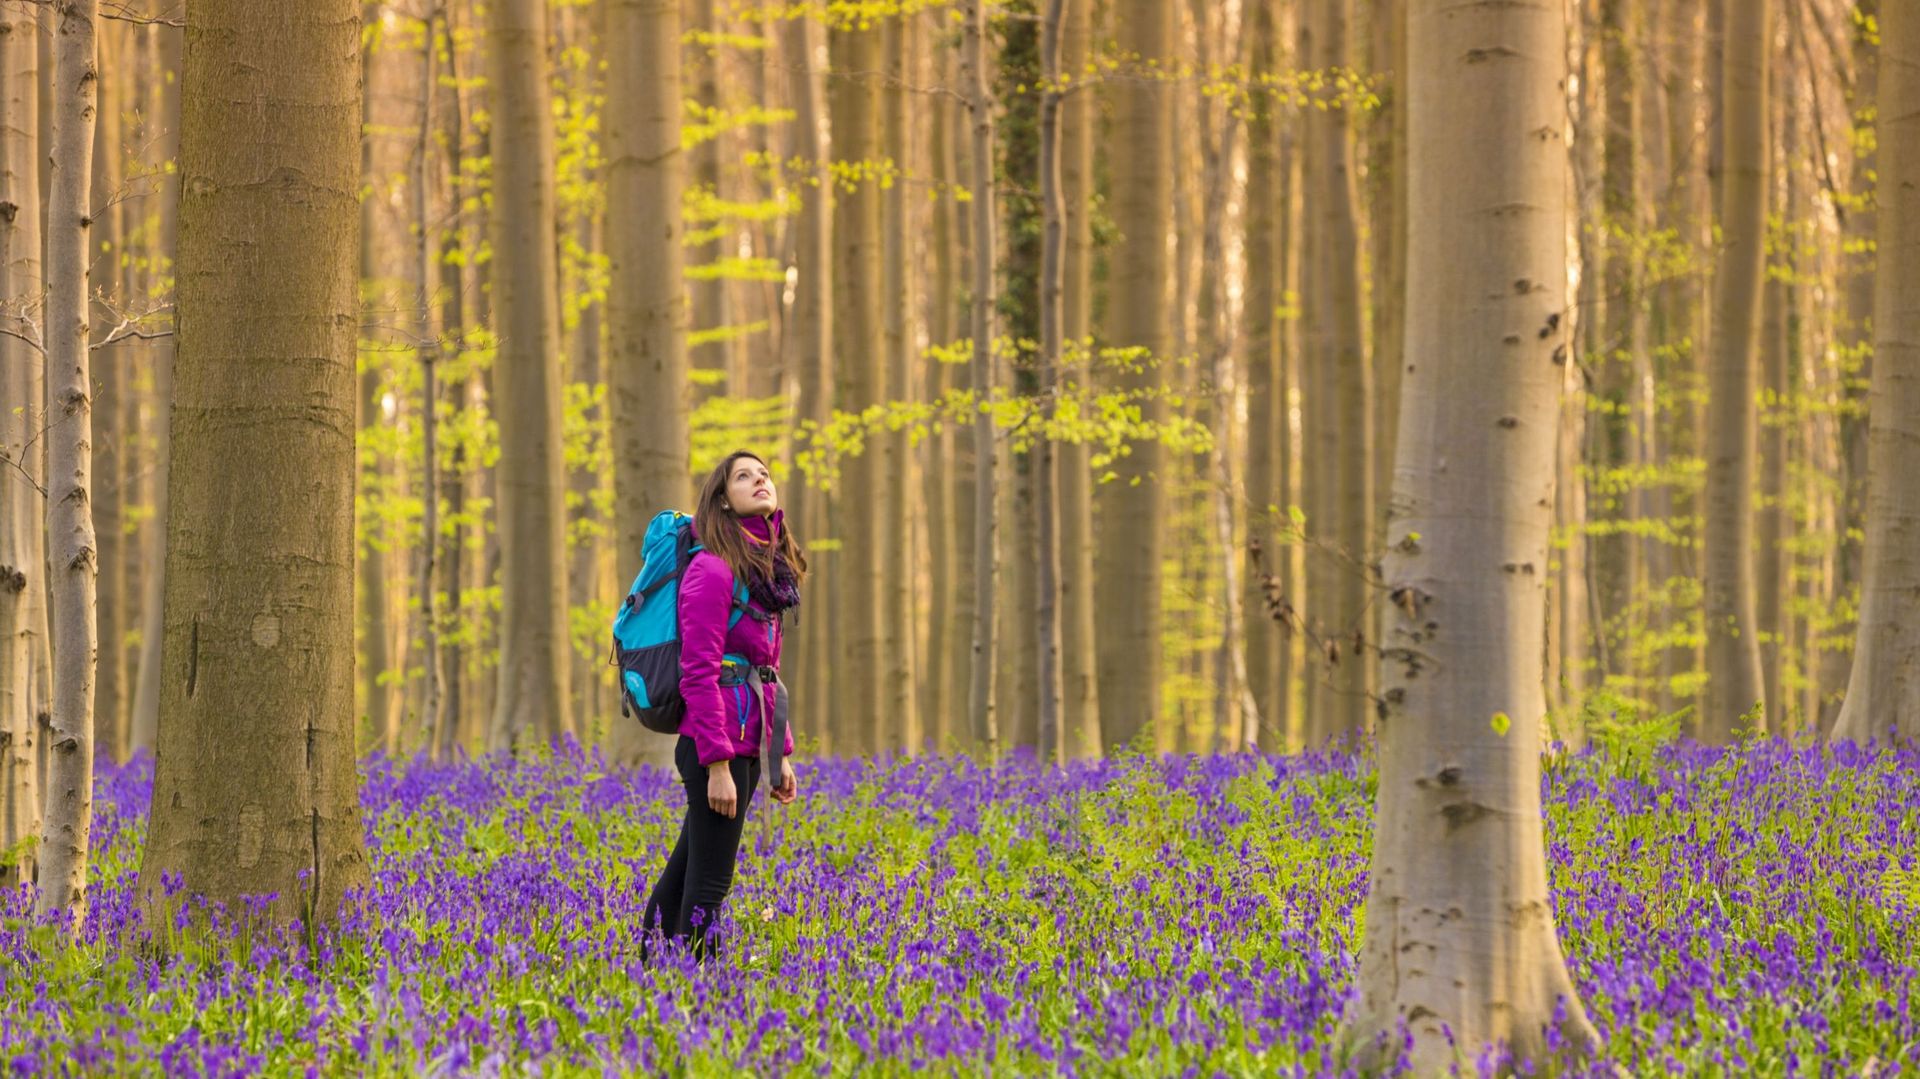 Young woman admiring the Blue forest known as Hallerbos, Halle, Flemish Brabant province, Belgium